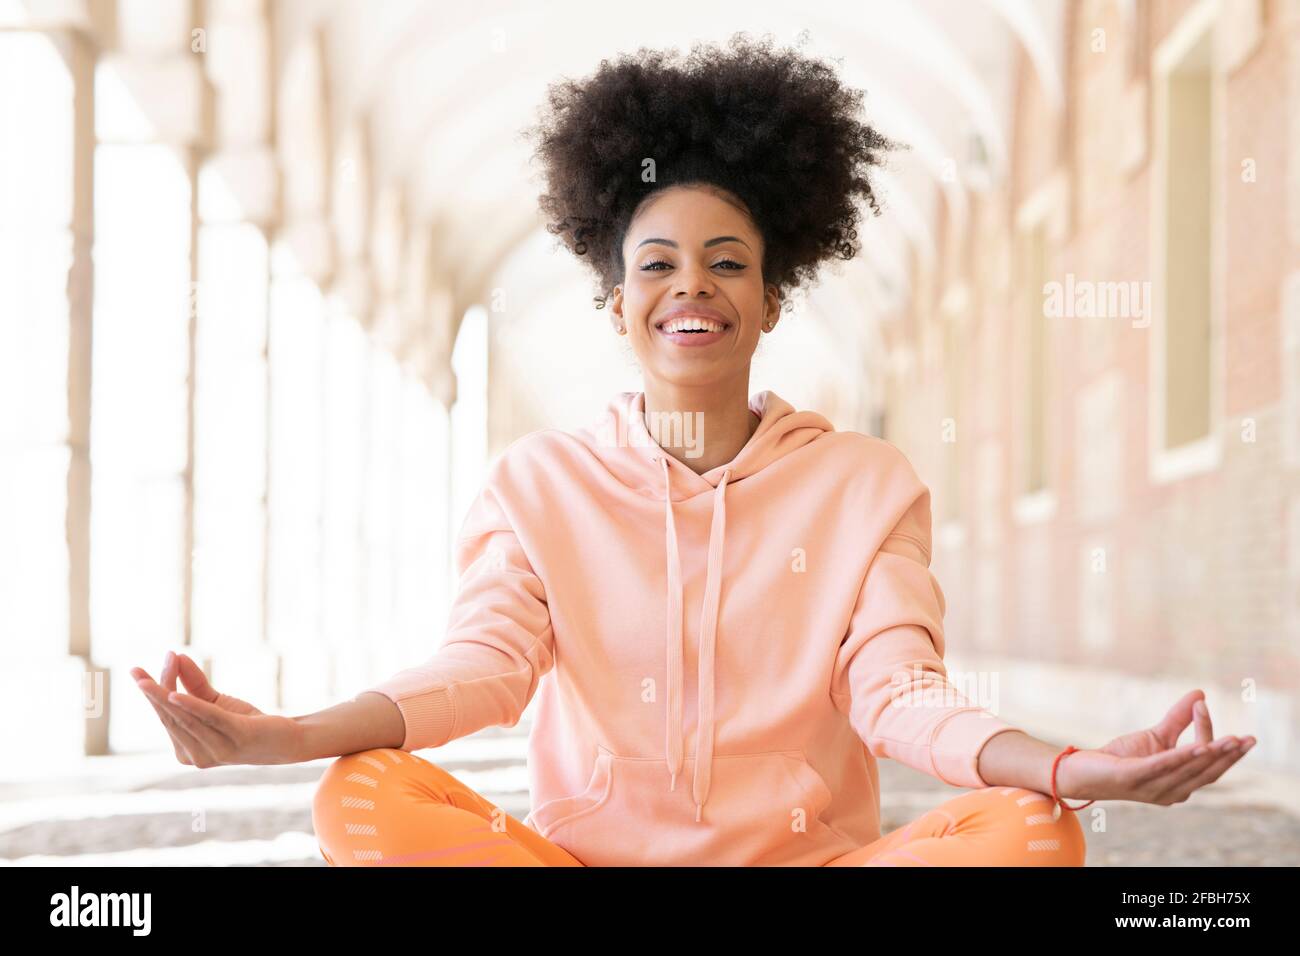 Happy afro woman meditating during sunny day Stock Photo